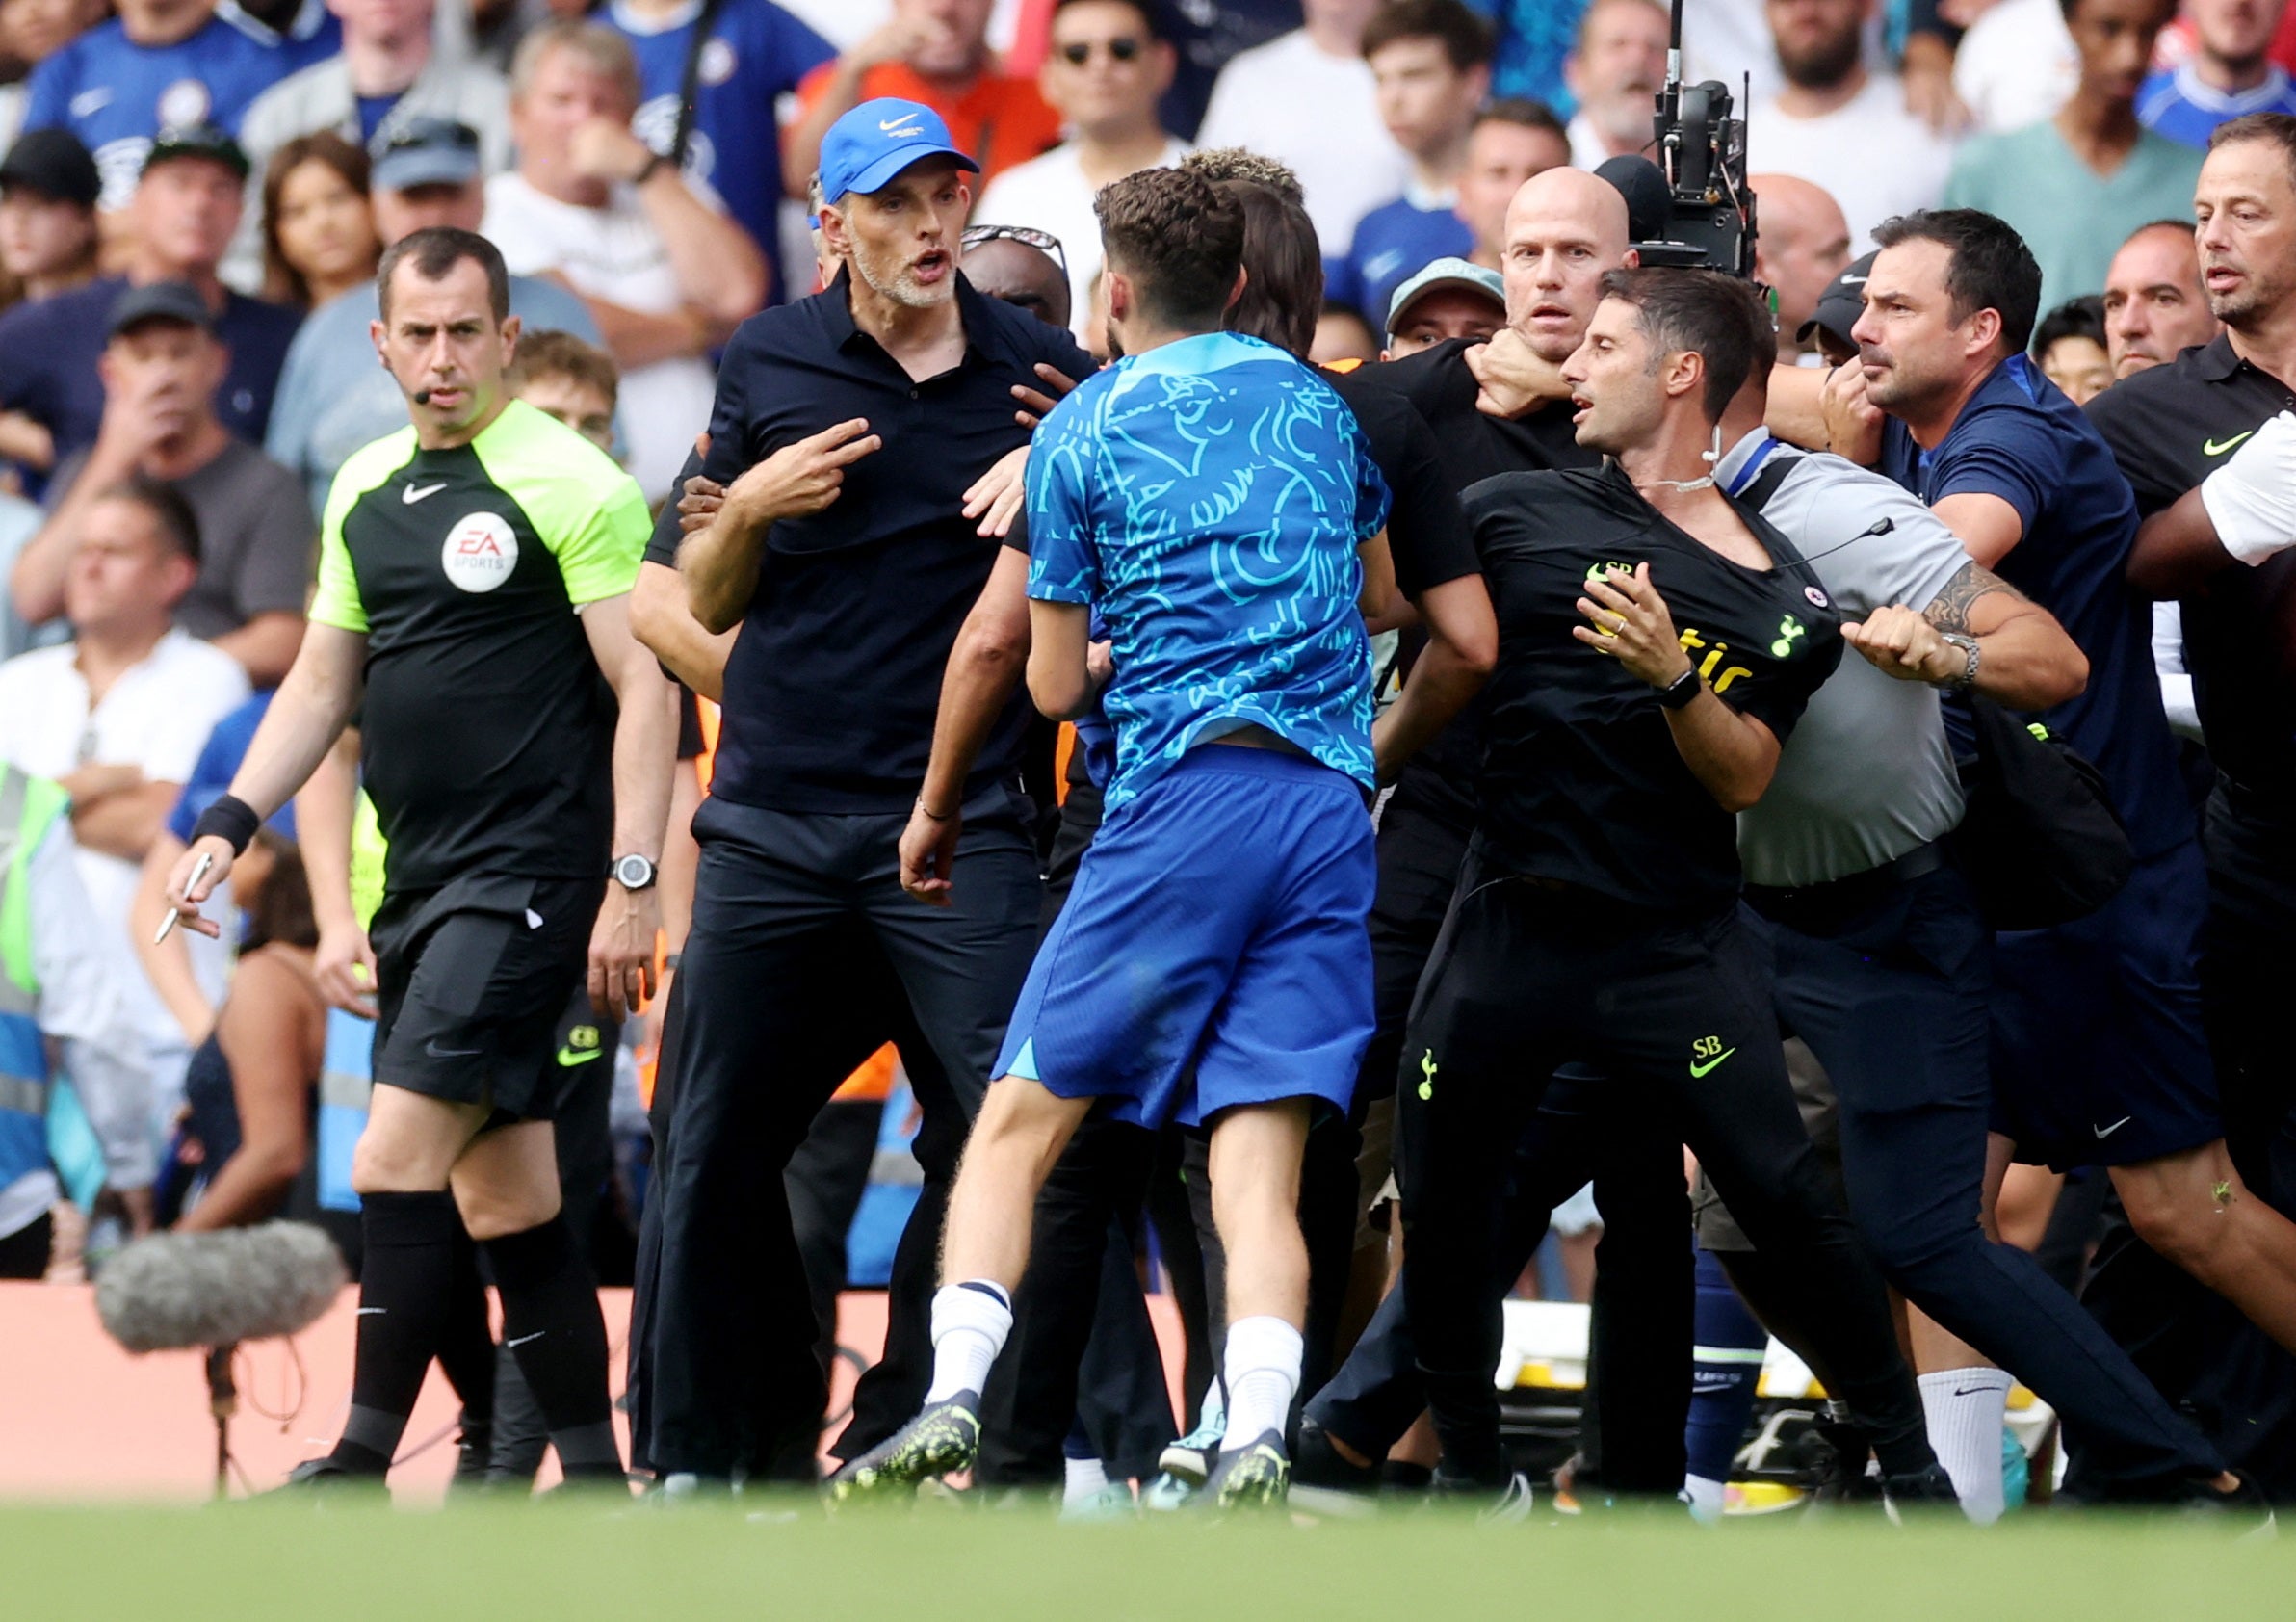 Tempers flared on the touchline